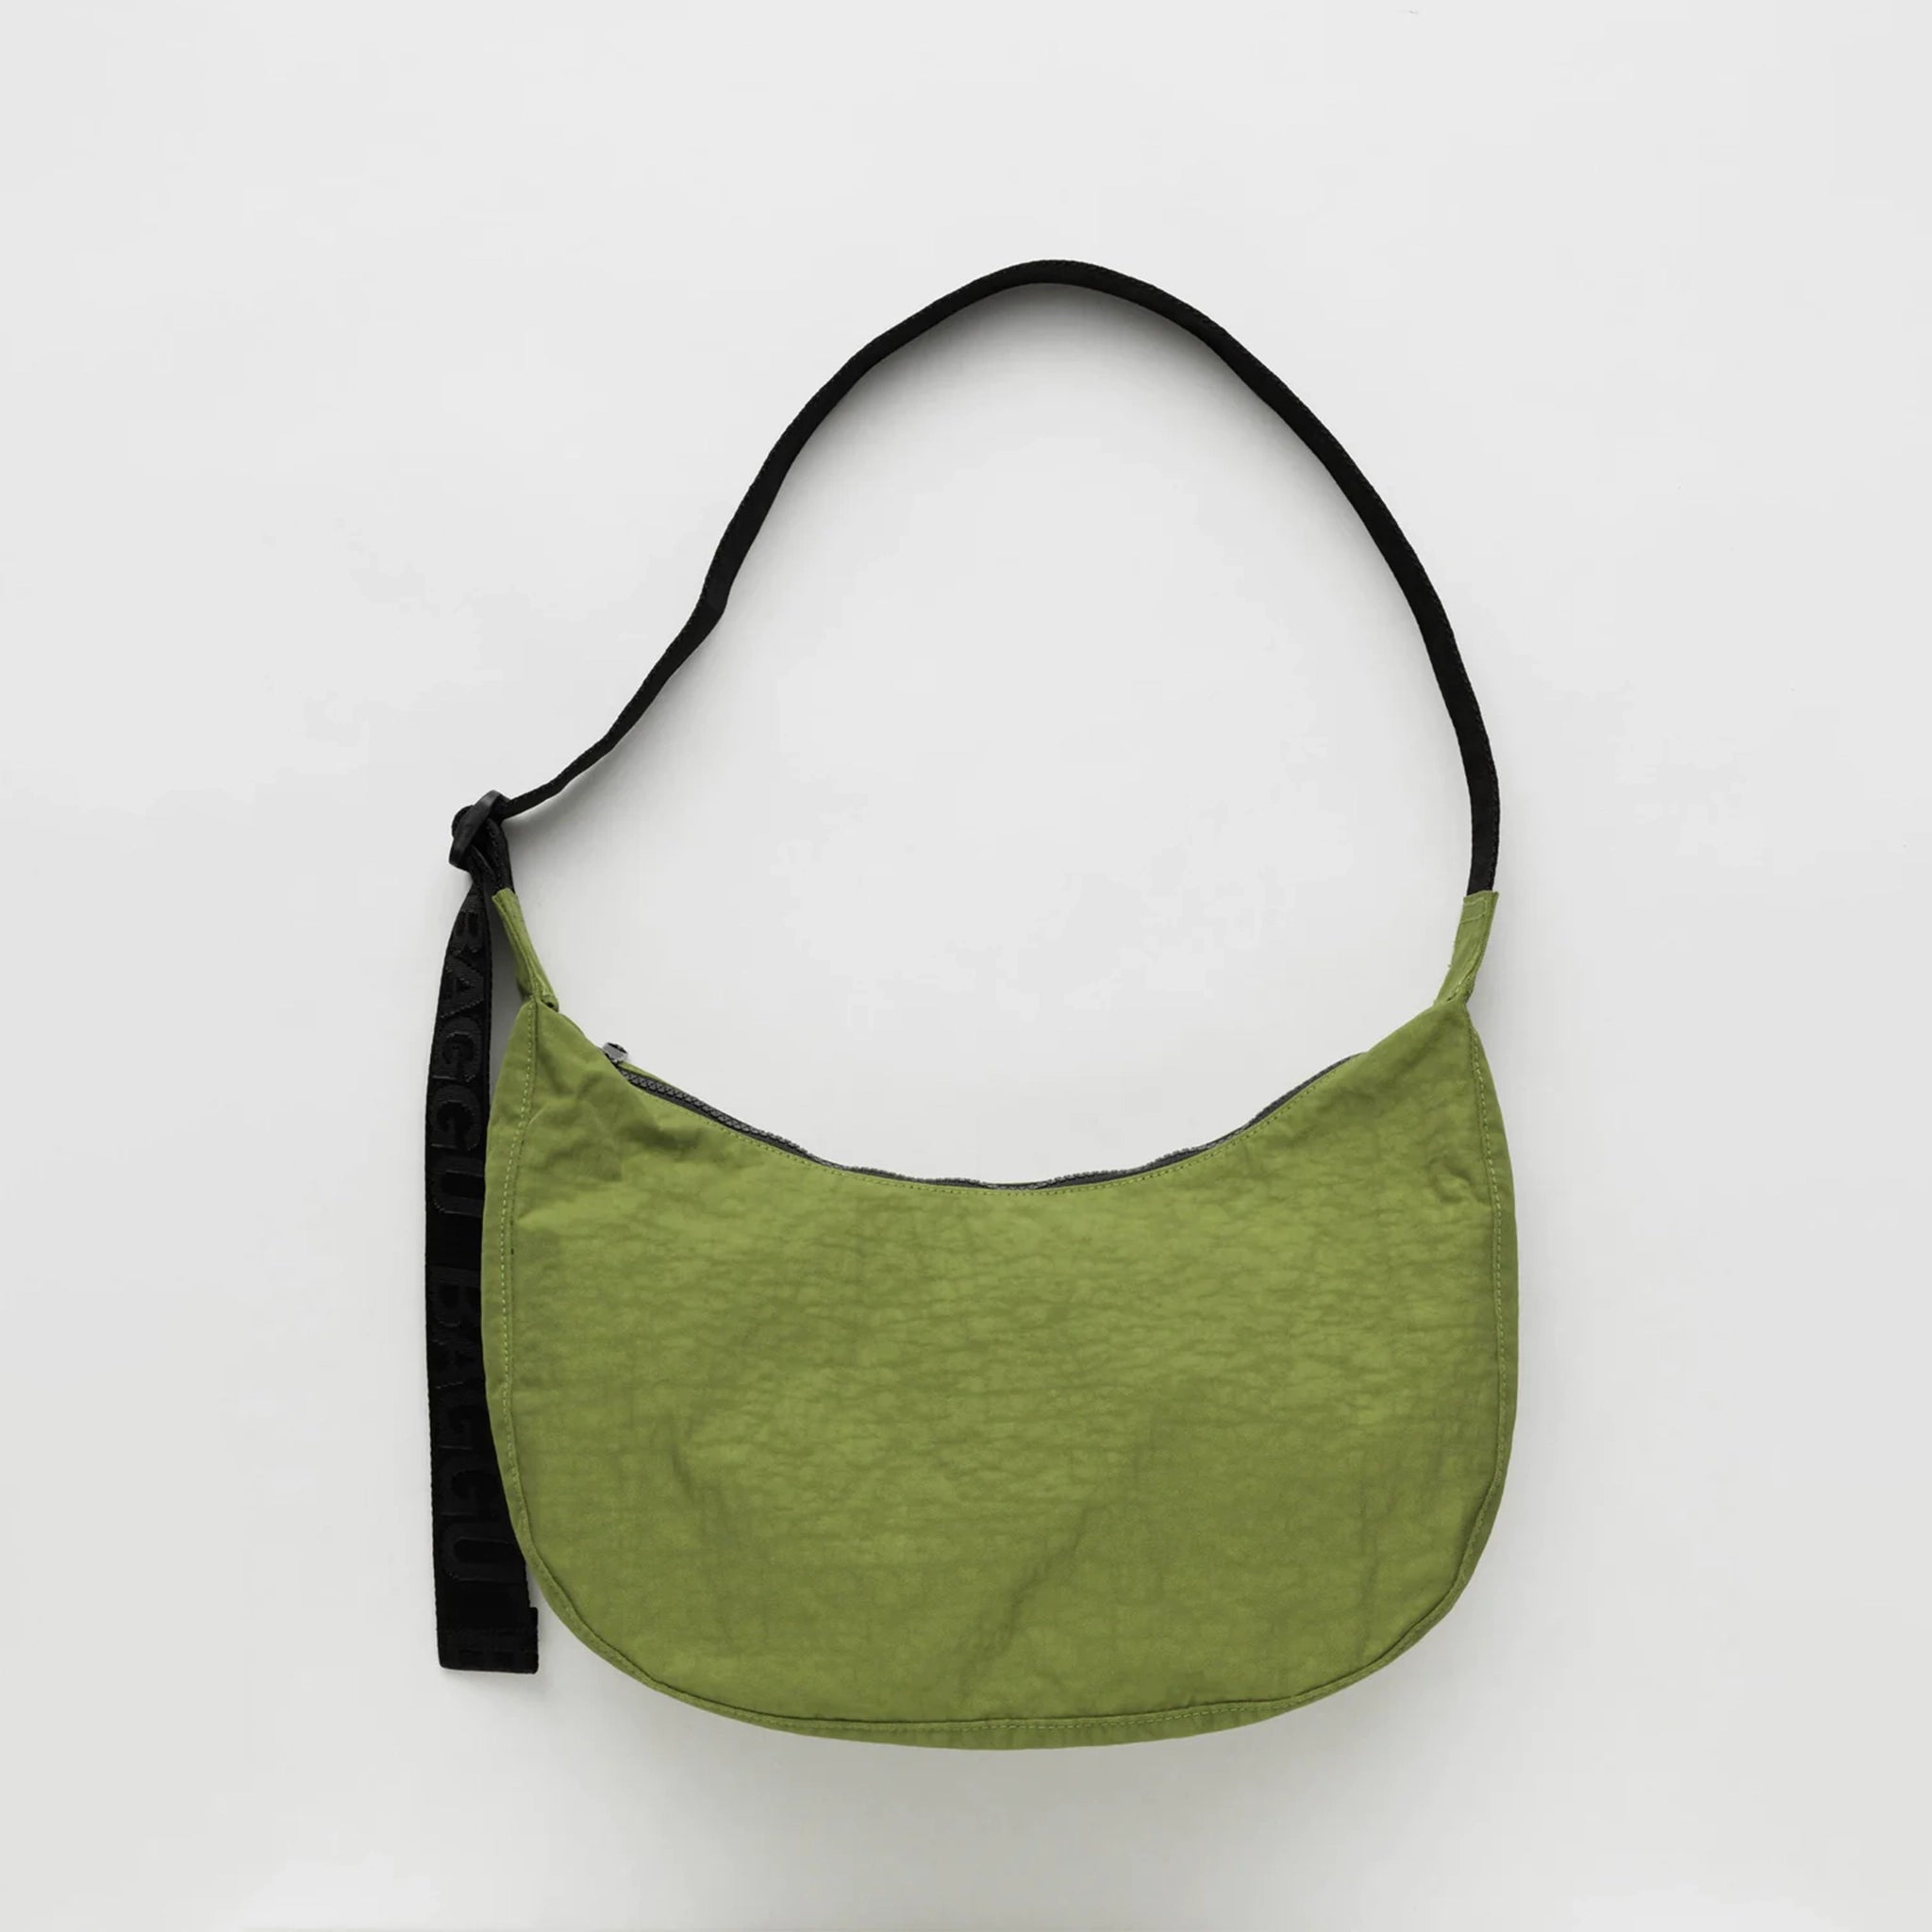 A vibrant green nylon crescent shaped bag with an adjustable black strap and a single zipper.